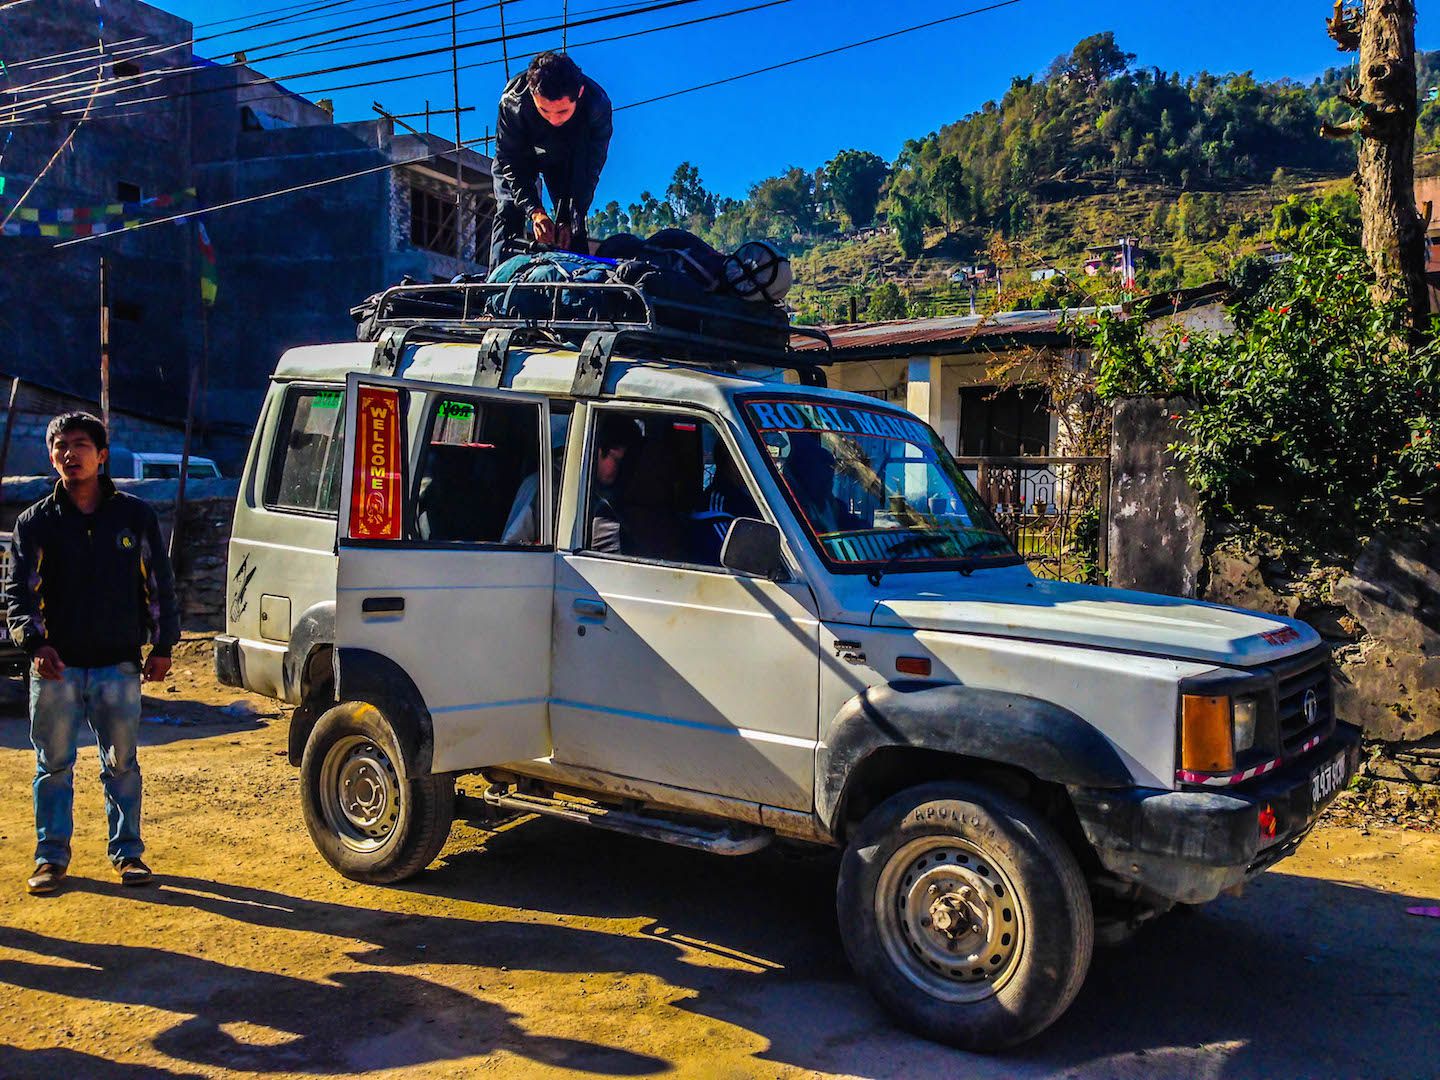 Our jeep from Besisahar to Chame, Nepal